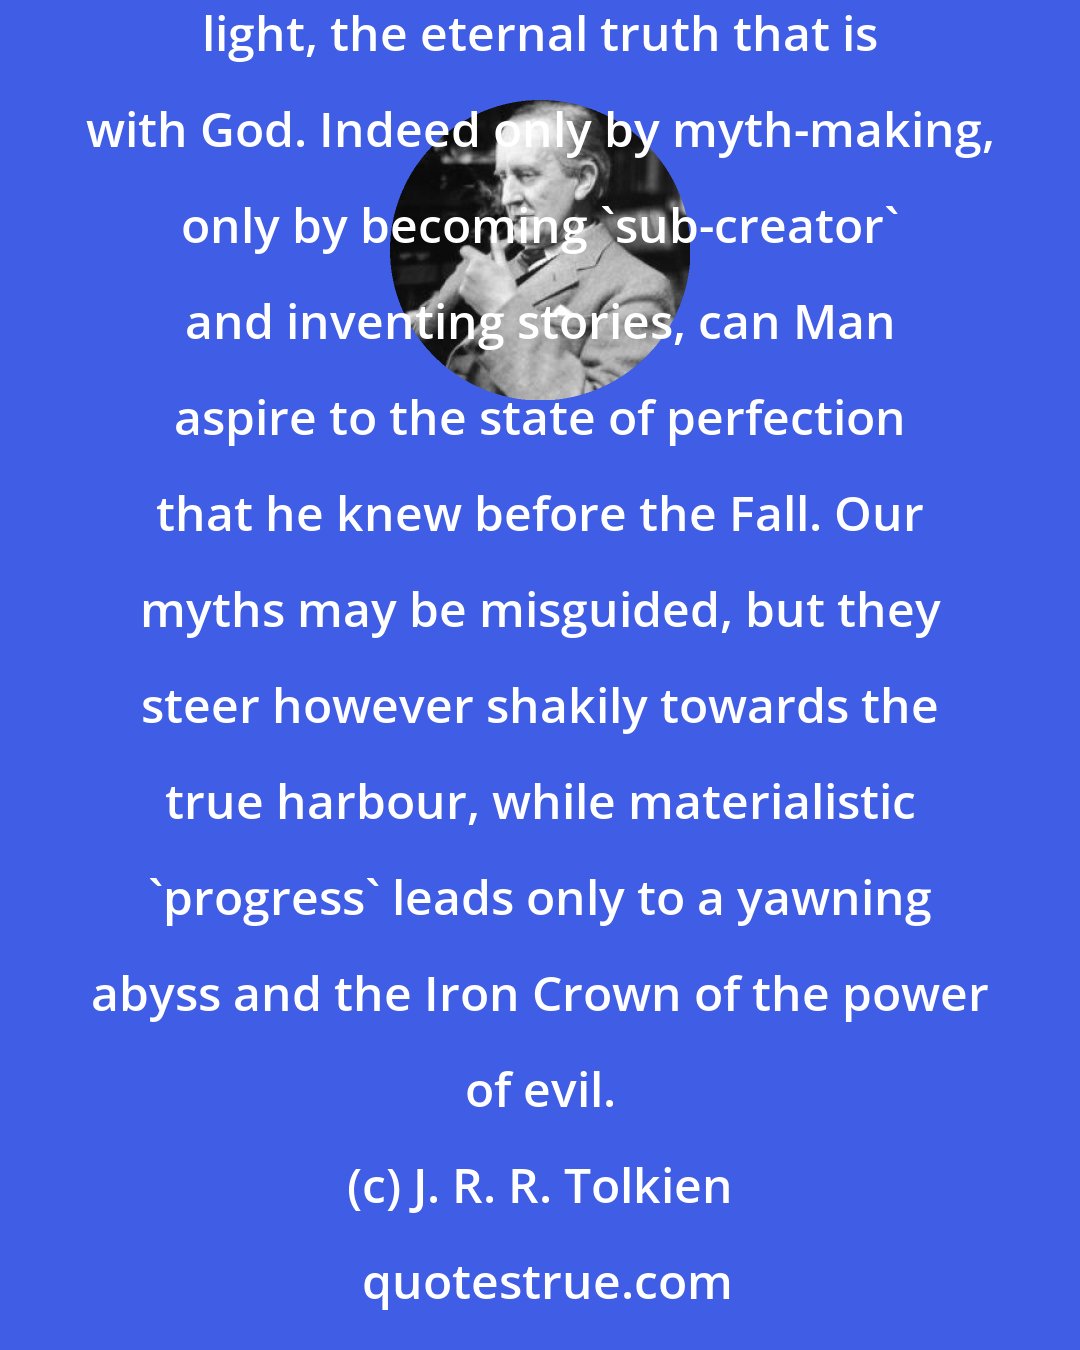 J. R. R. Tolkien: We have come from God, and inevitably the myths woven by us, though they contain error, will also reflect a splintered fragment of the true light, the eternal truth that is with God. Indeed only by myth-making, only by becoming 'sub-creator' and inventing stories, can Man aspire to the state of perfection that he knew before the Fall. Our myths may be misguided, but they steer however shakily towards the true harbour, while materialistic 'progress' leads only to a yawning abyss and the Iron Crown of the power of evil.